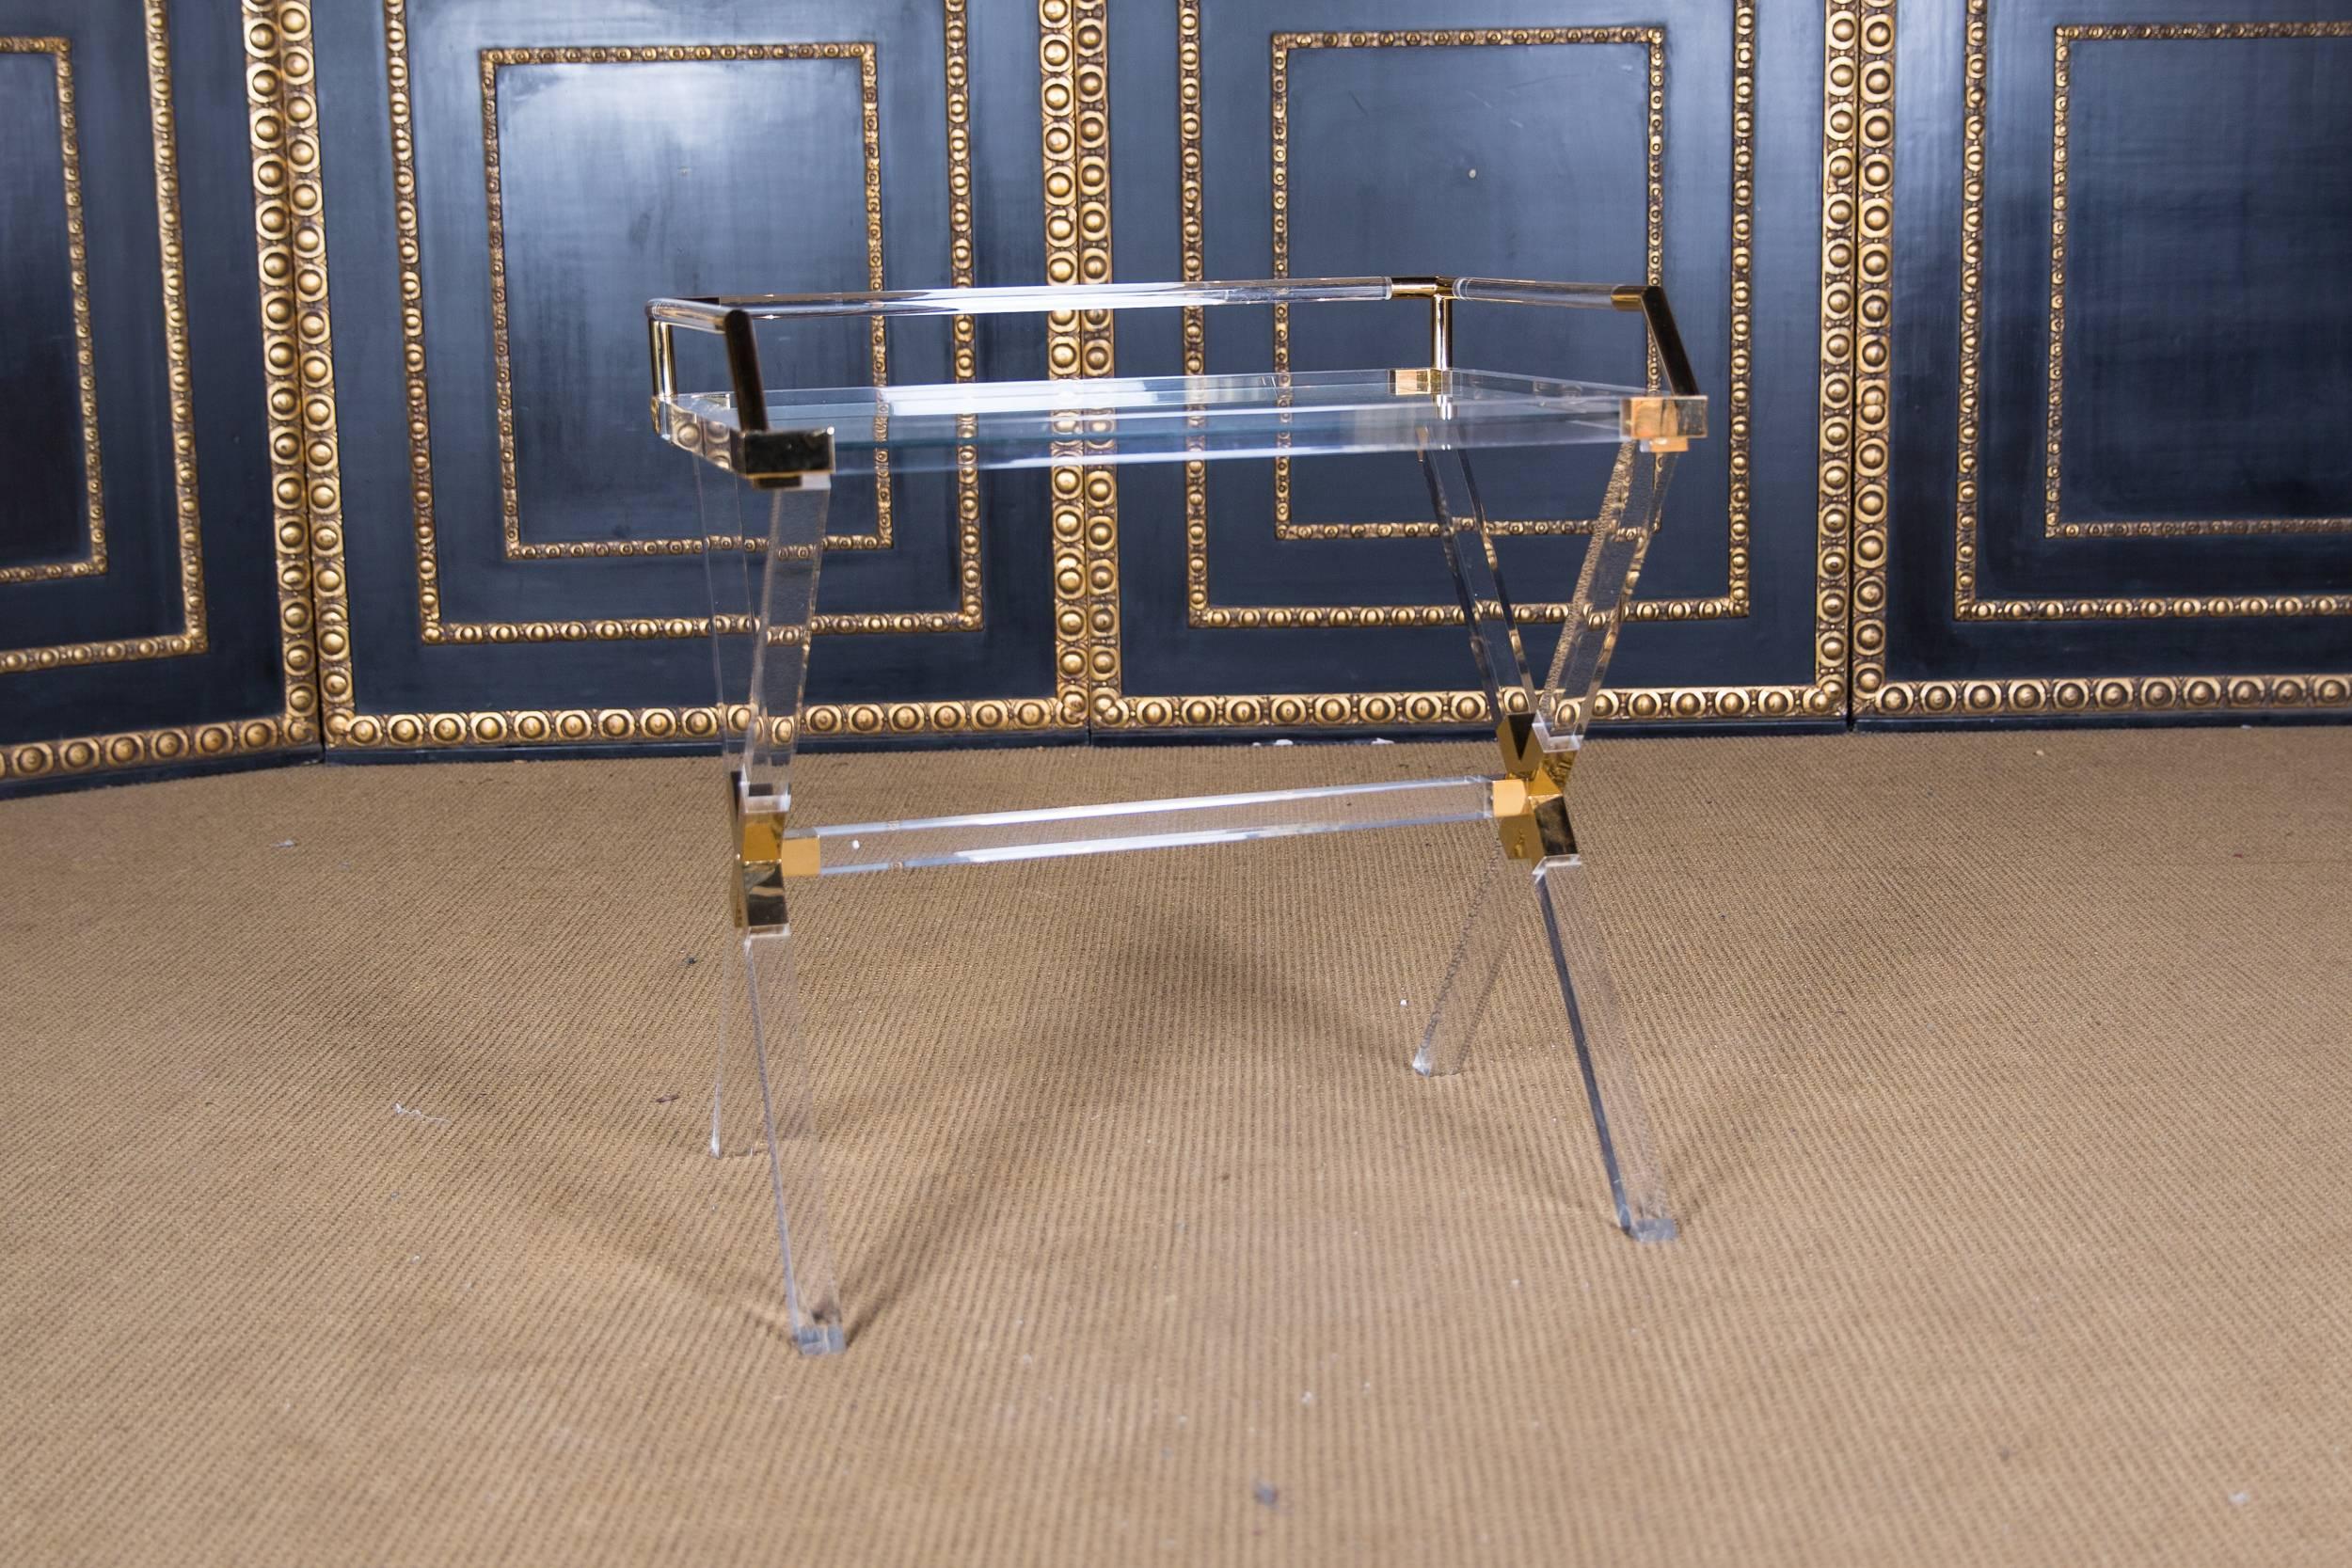 Exclusive acrylic serving tray table with brass.
Made in Italy.
Light surface scratches.

Dimensions:
Height (with frame): 72 cm
Height (panel): 65 cm
Width: 70 cm
Depth: 52 cm.